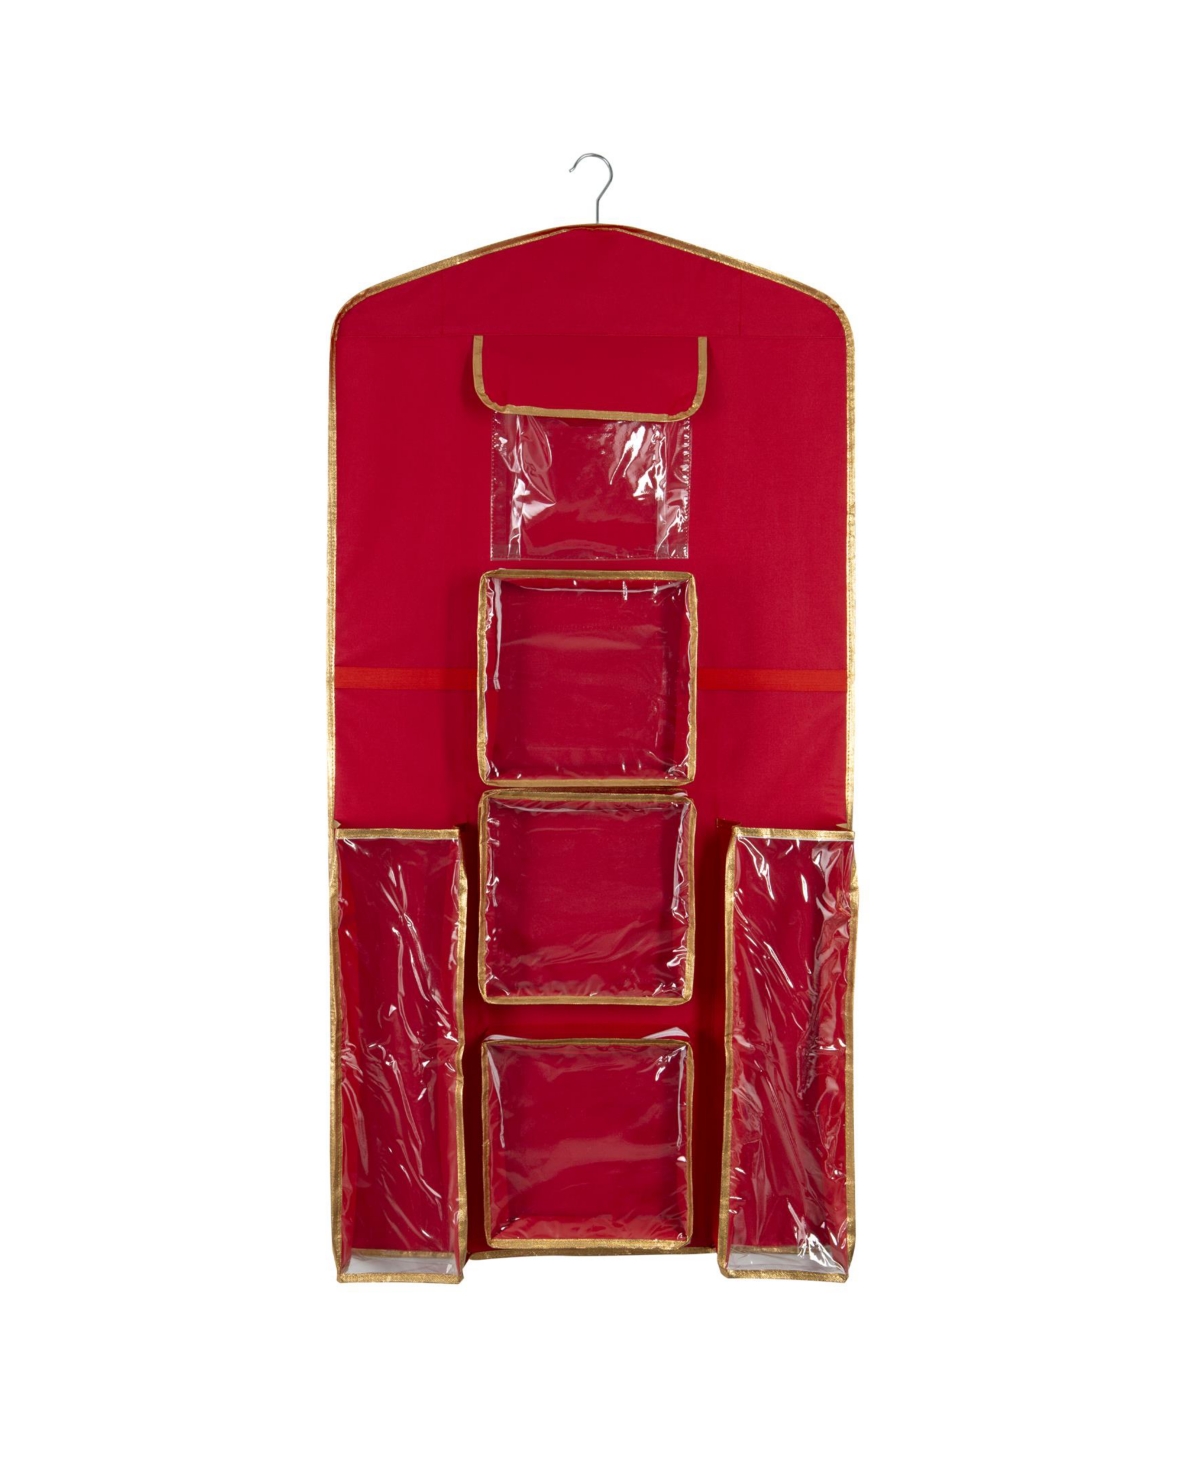 8 Compartment Hanging Holiday Gift Wrap Organizer - Red